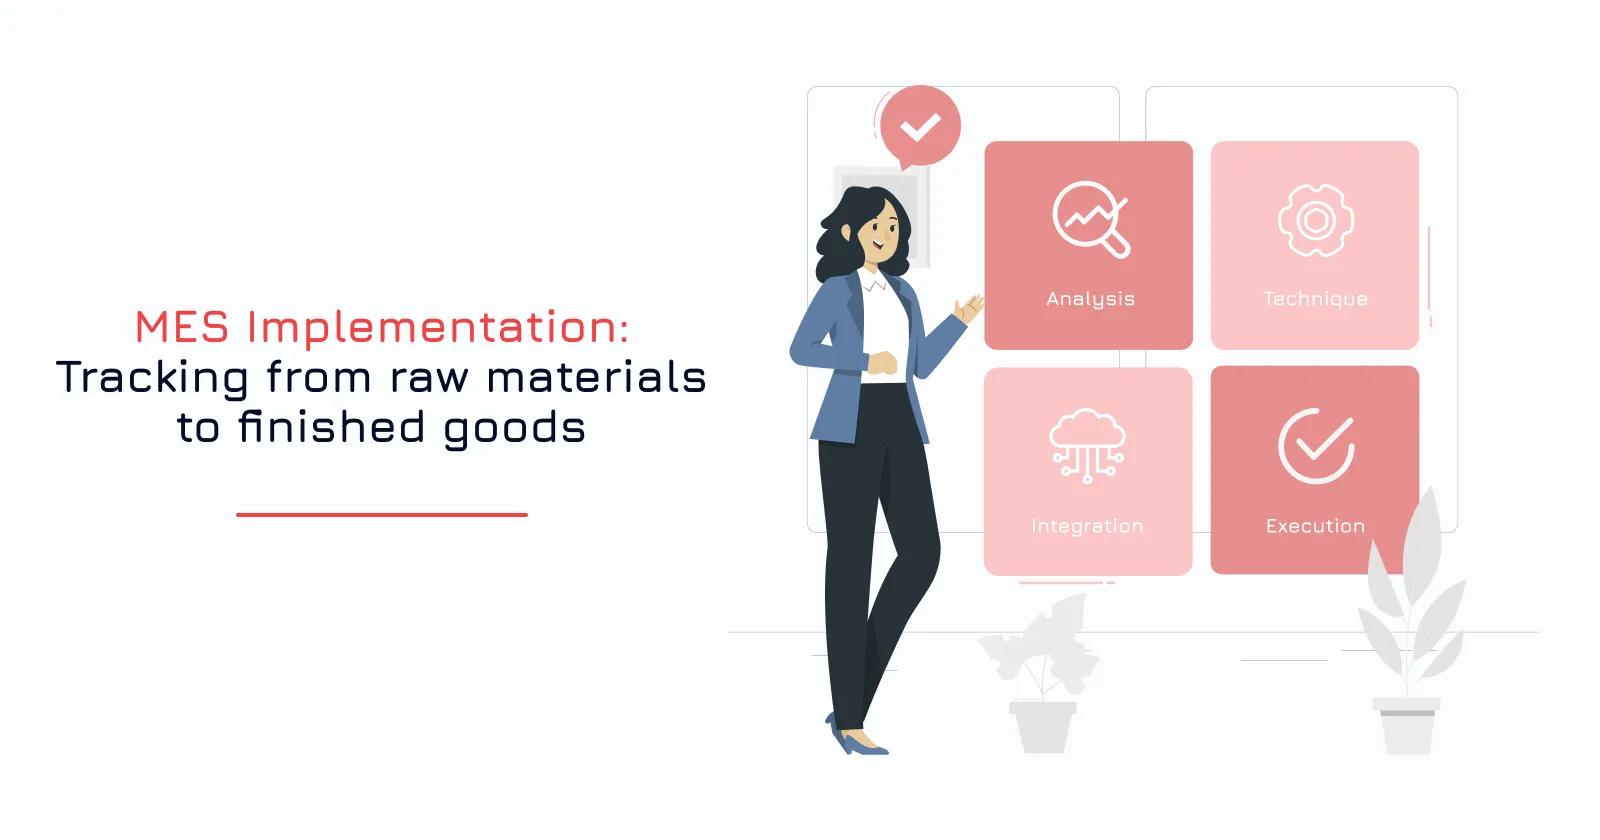 MES Implementation: Tracking from raw materials to finished goods